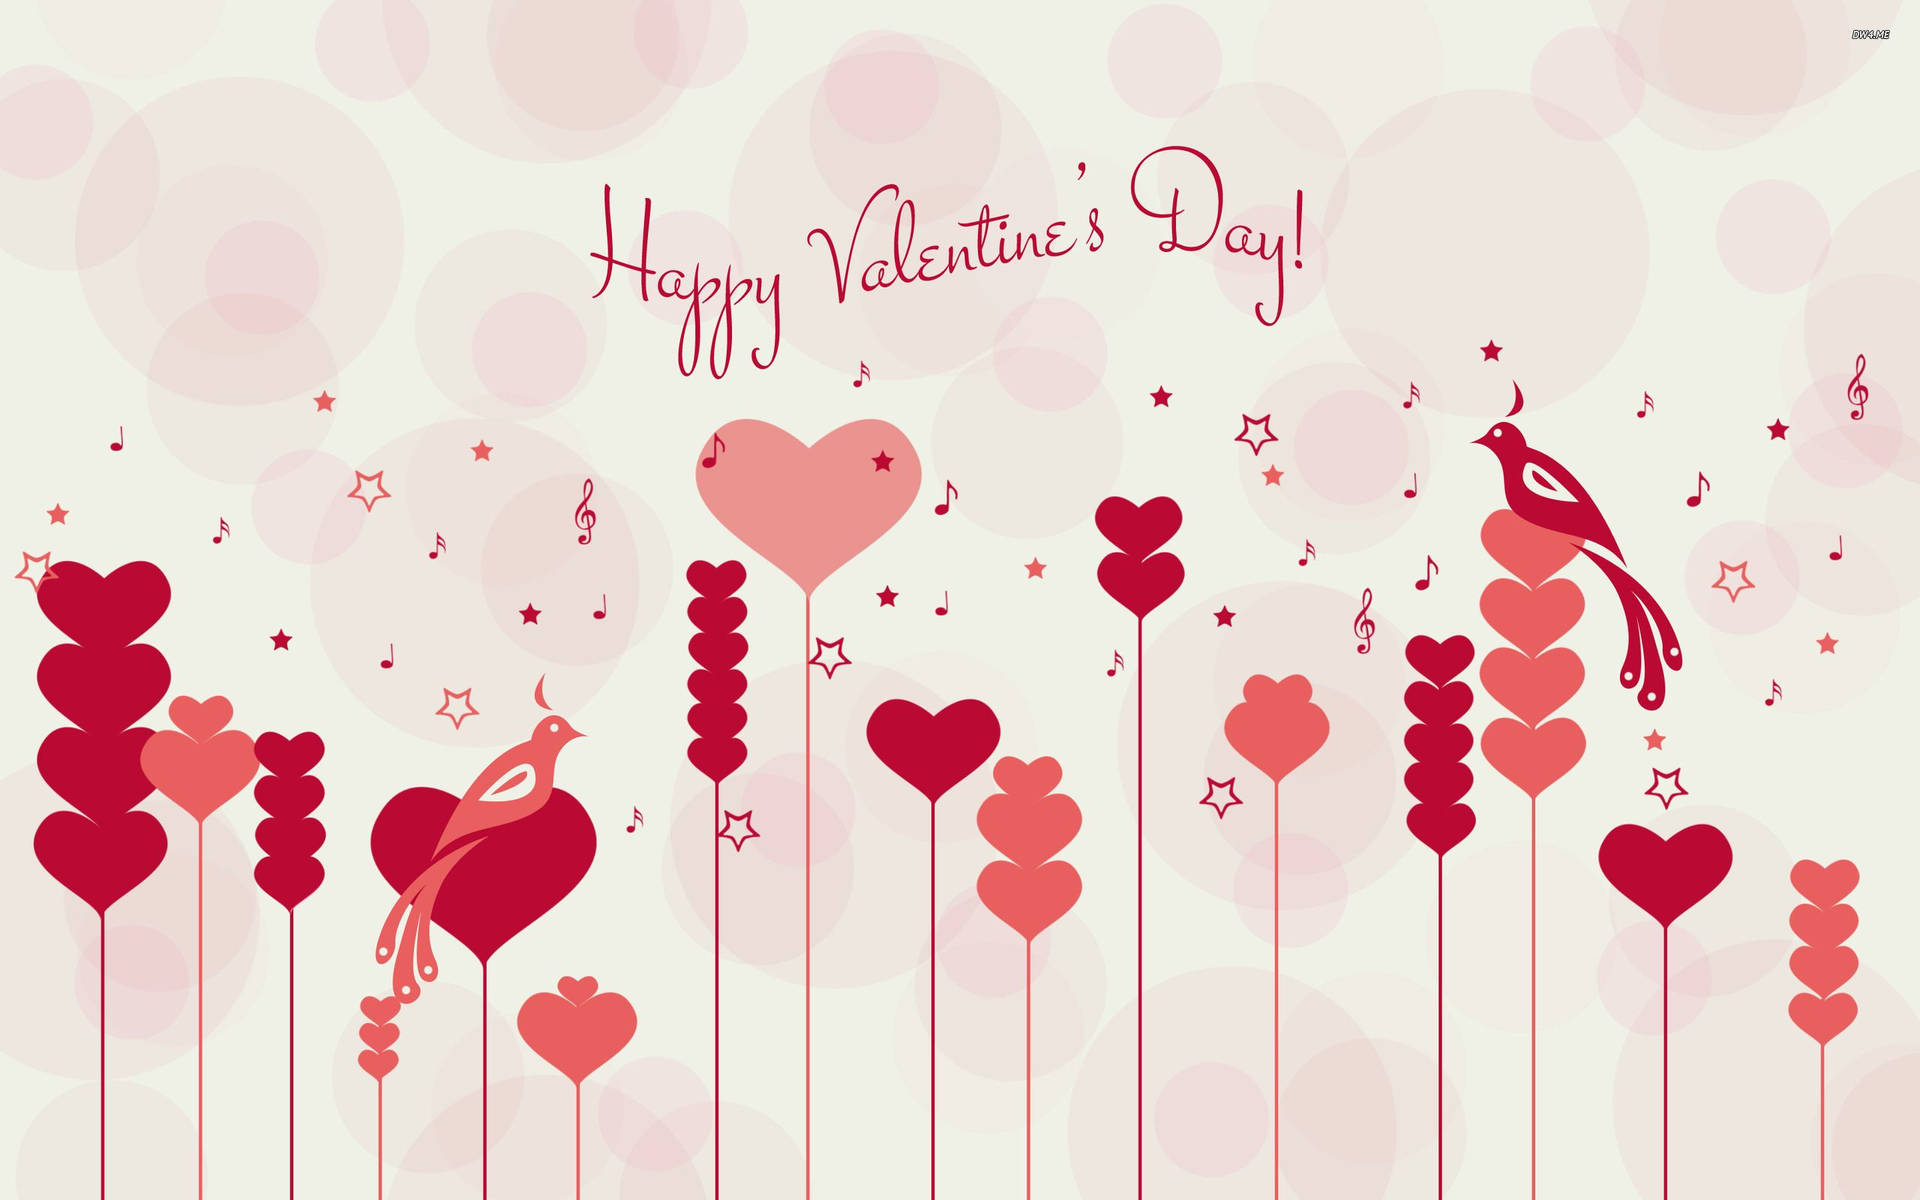 Free Cute Valentines Day Wallpaper Downloads, [100+] Cute Valentines Day  Wallpapers for FREE 